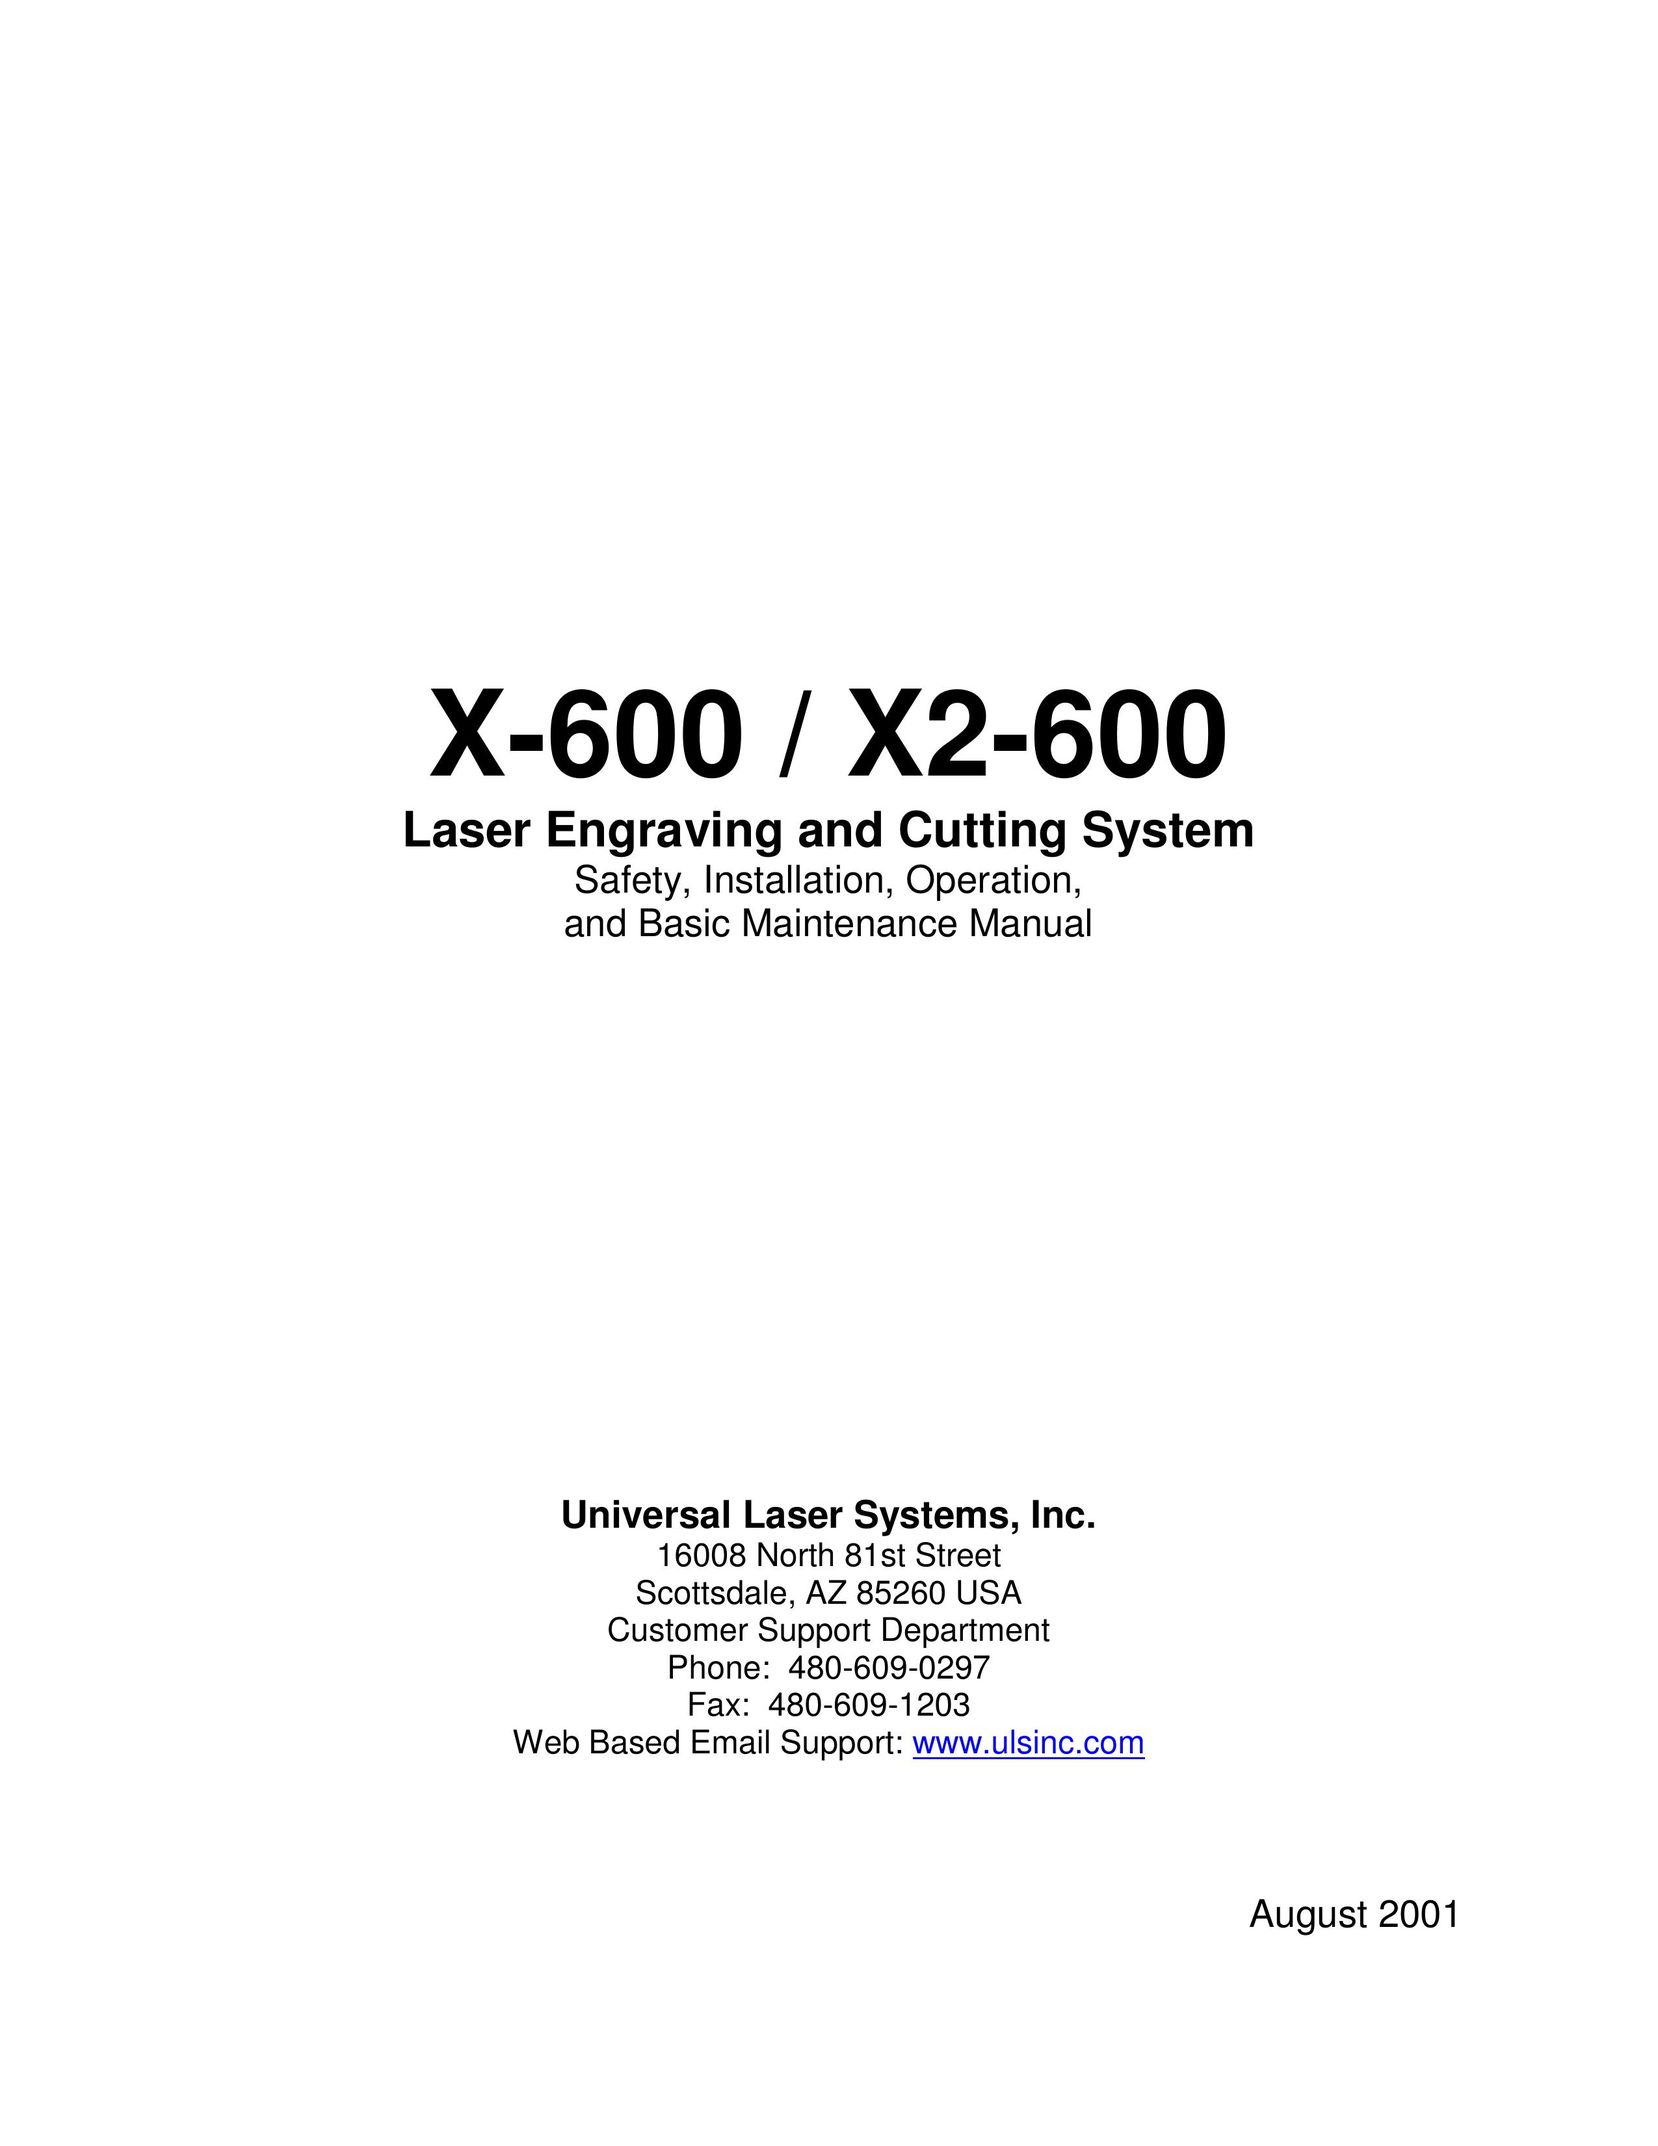 Universal Laser Systems X2-600 Engraver User Manual